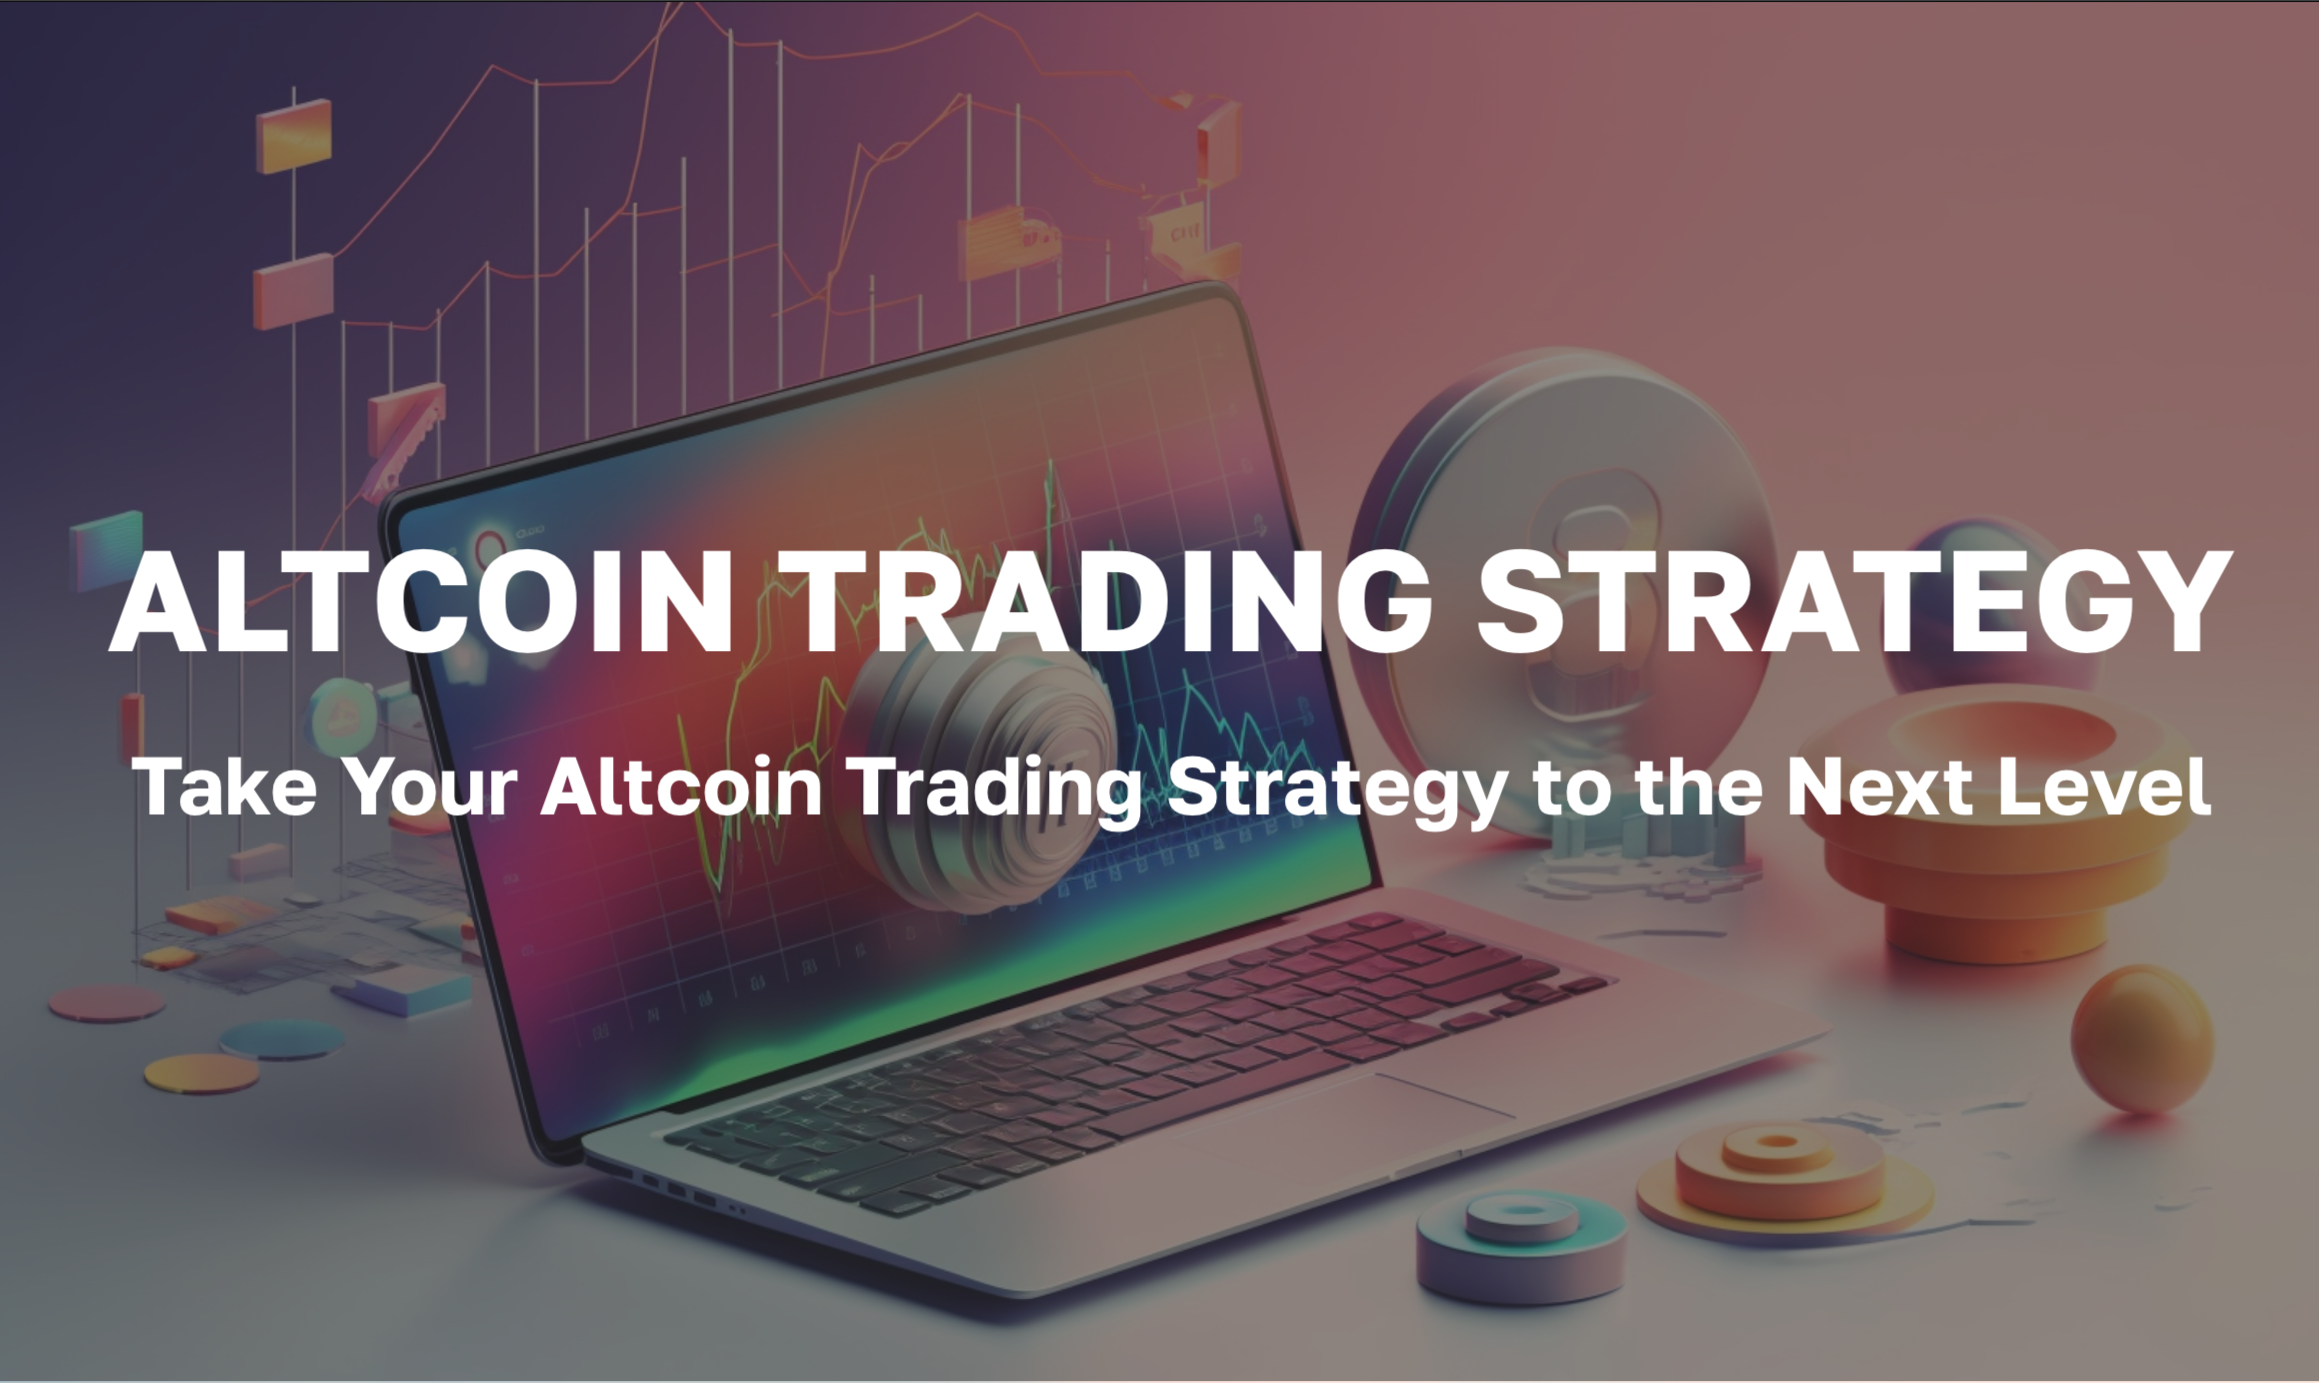 Title: Discover the Cheapest Way to Buy Crypto with Our Altcoin Trading Strategy